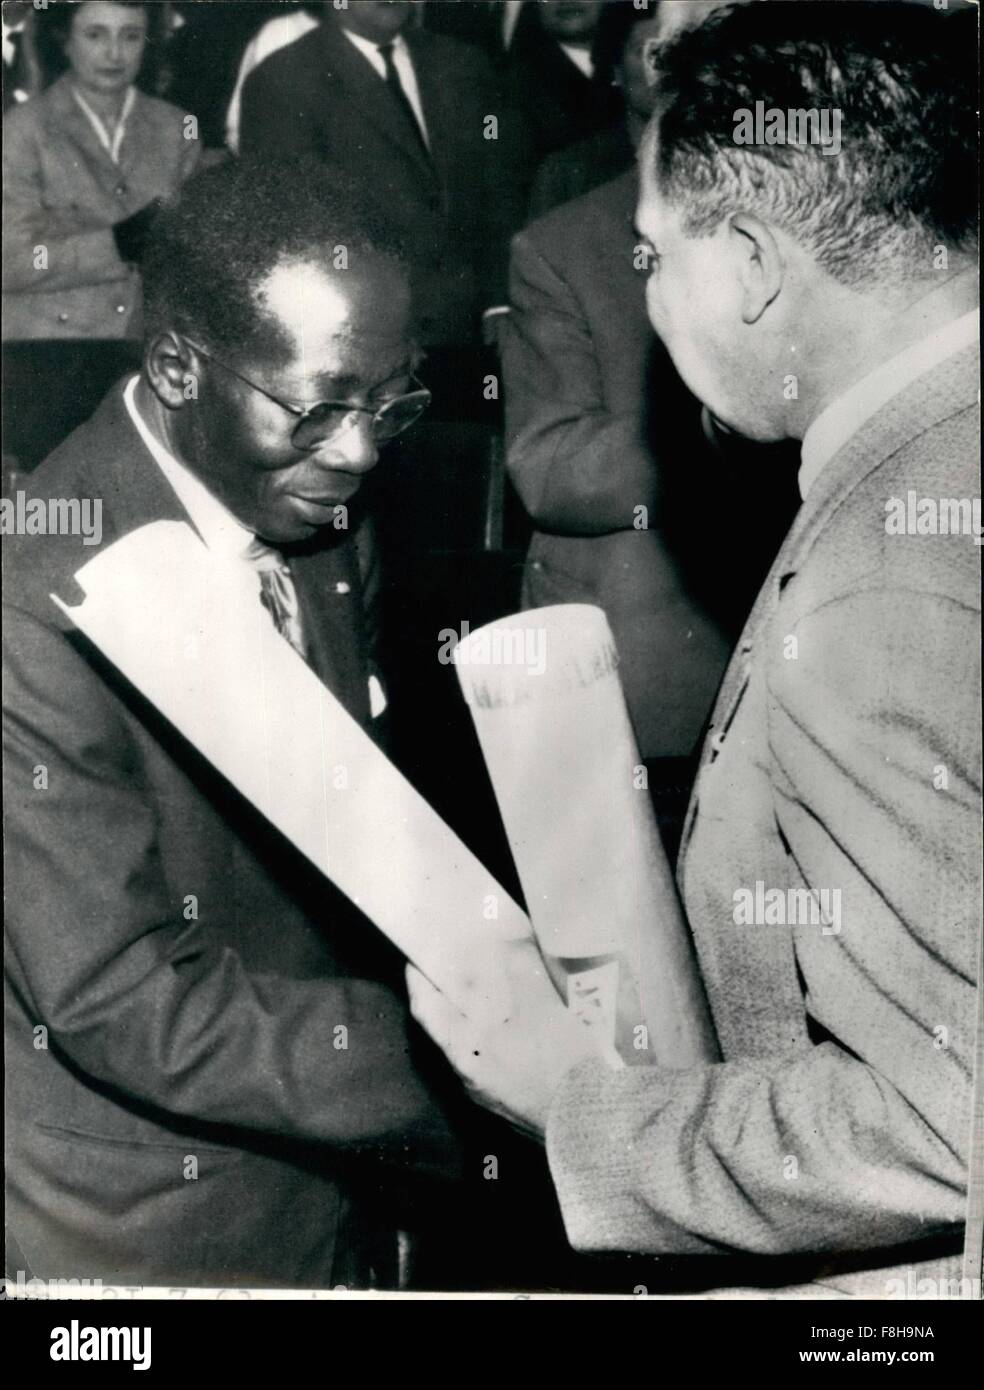 1972 - The President of the Republic of Senegal, Leopold Senghor won the International Grand Prize of Poetry, which was awarded to him for his poems published under the title ''Nocturnes'' Photo shows President Senghor receiving the diploma at the 5th National Congress of the Association of Poets and Artists of France held at Rouen. © Keystone Pictures USA/ZUMAPRESS.com/Alamy Live News Stock Photo